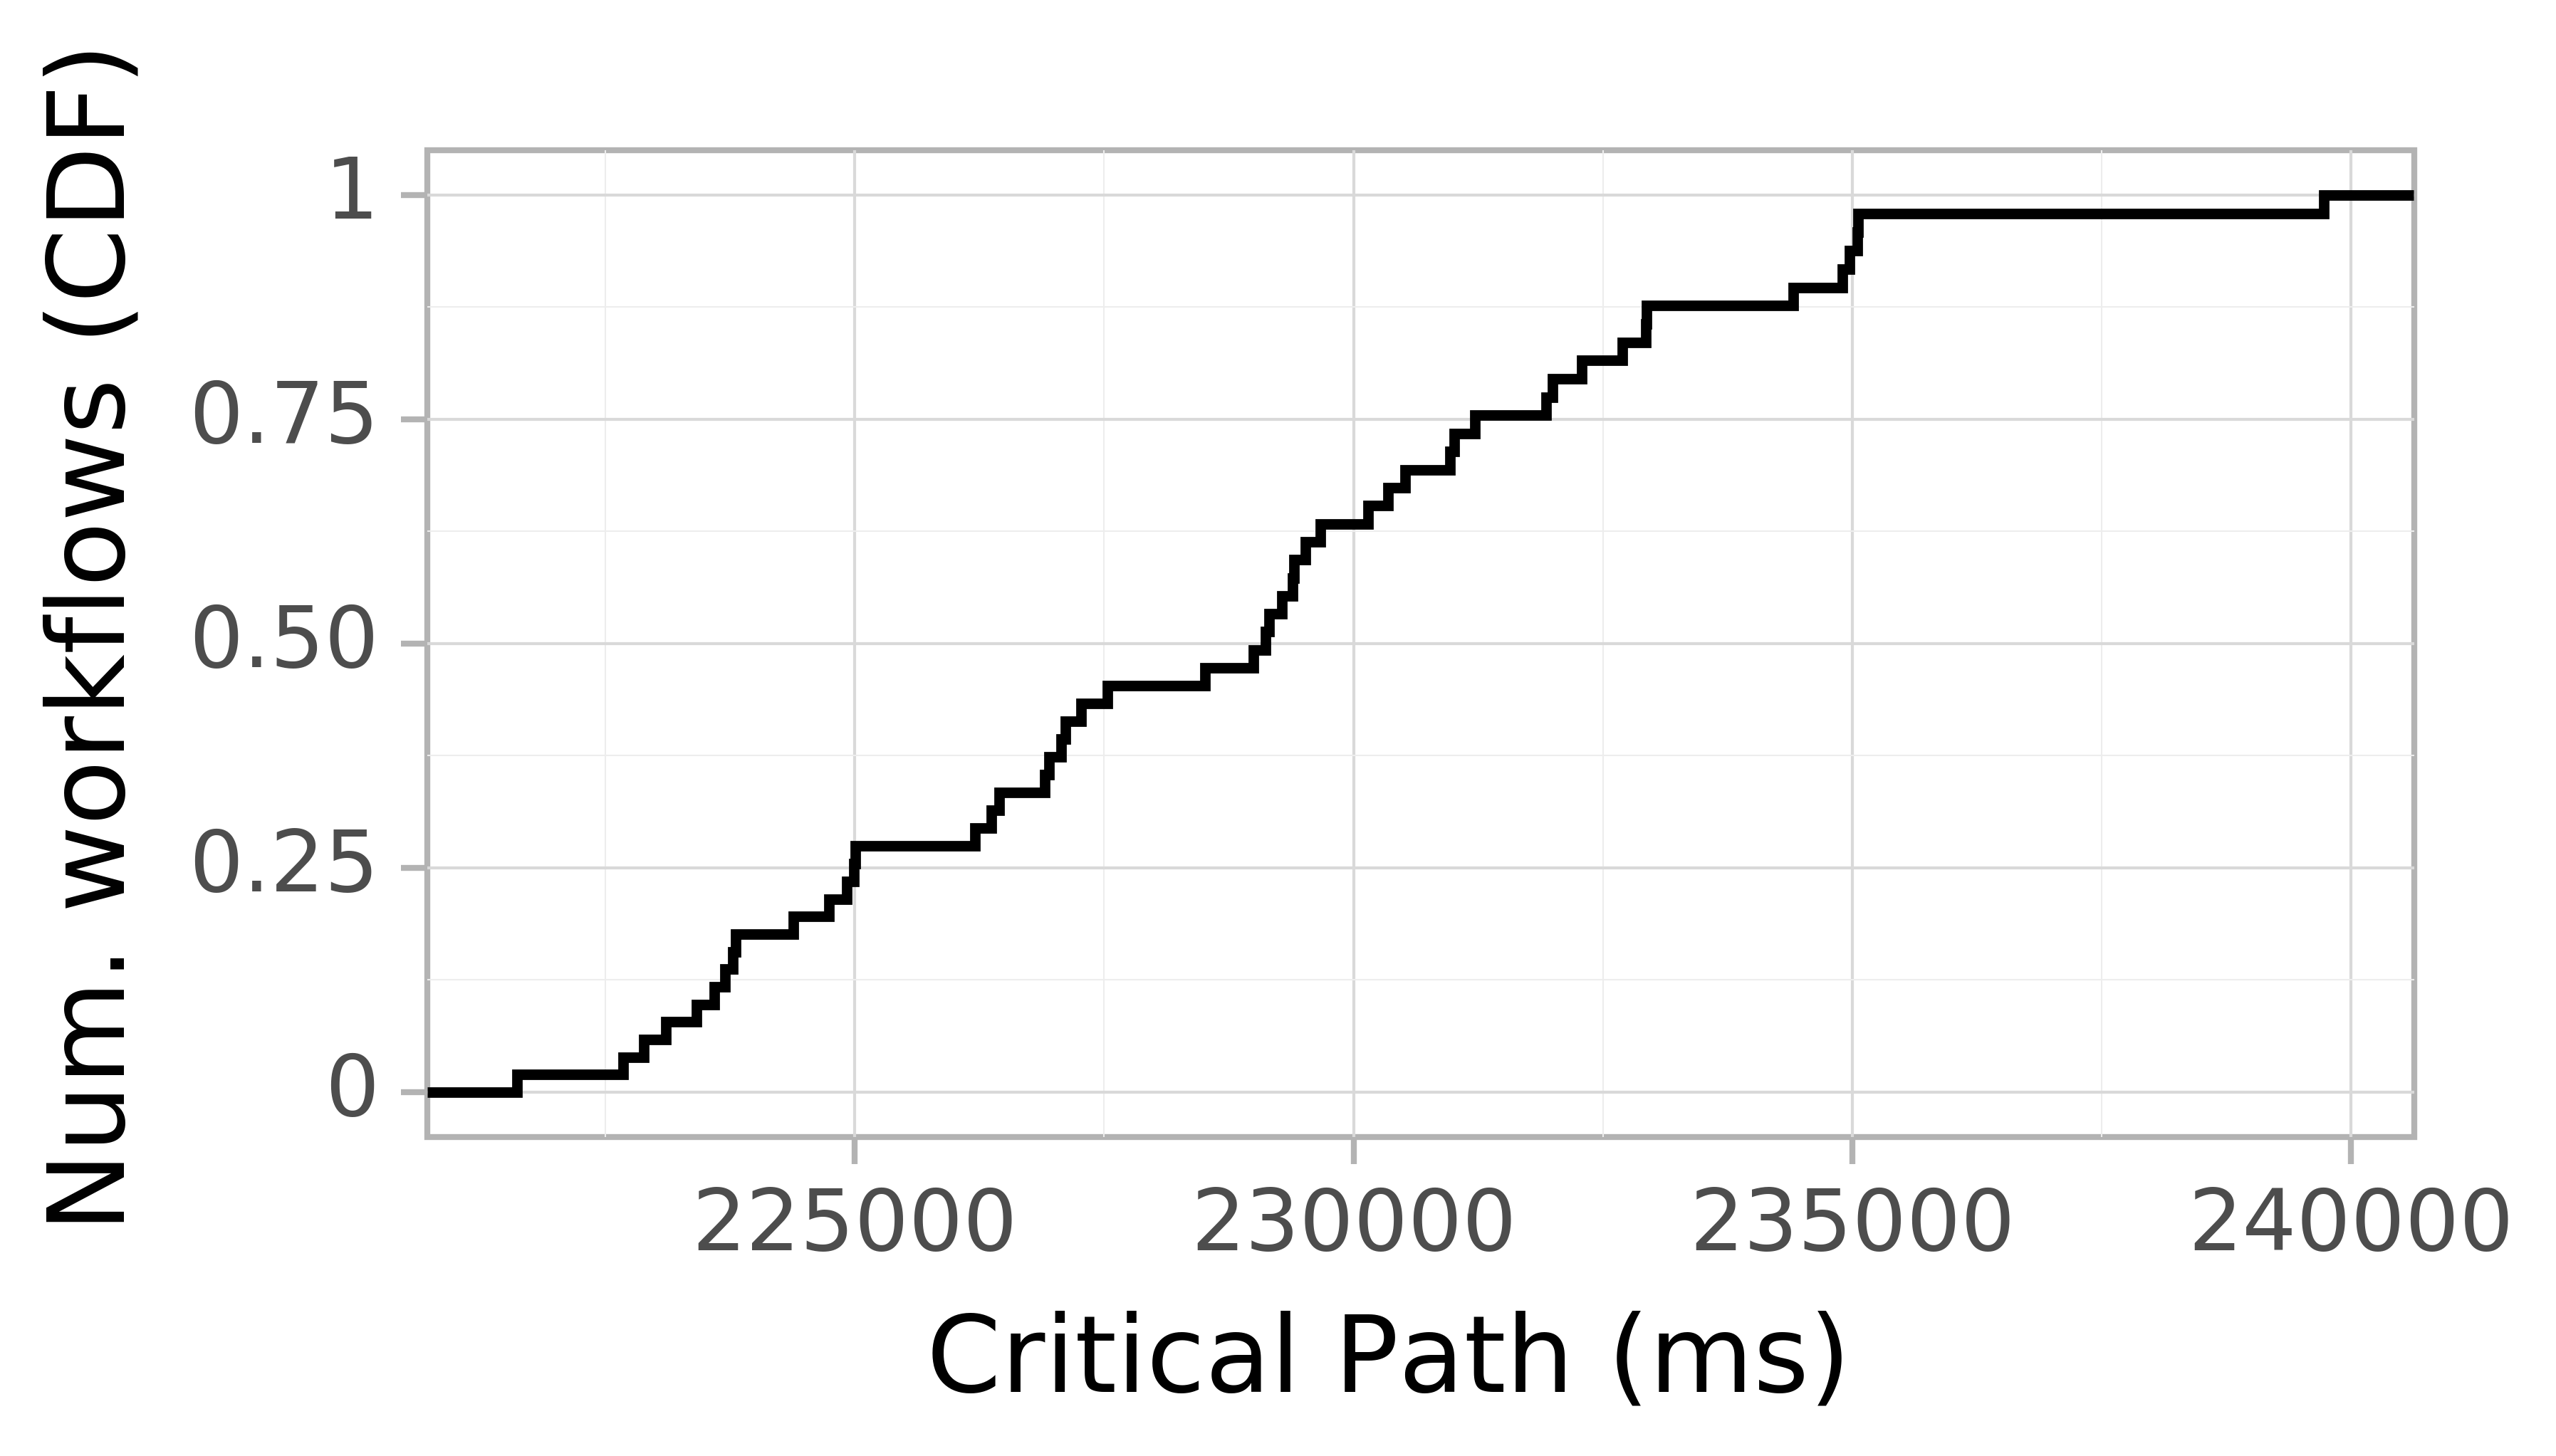 Job runtime CDF graph for the askalon-new_ee57 trace.